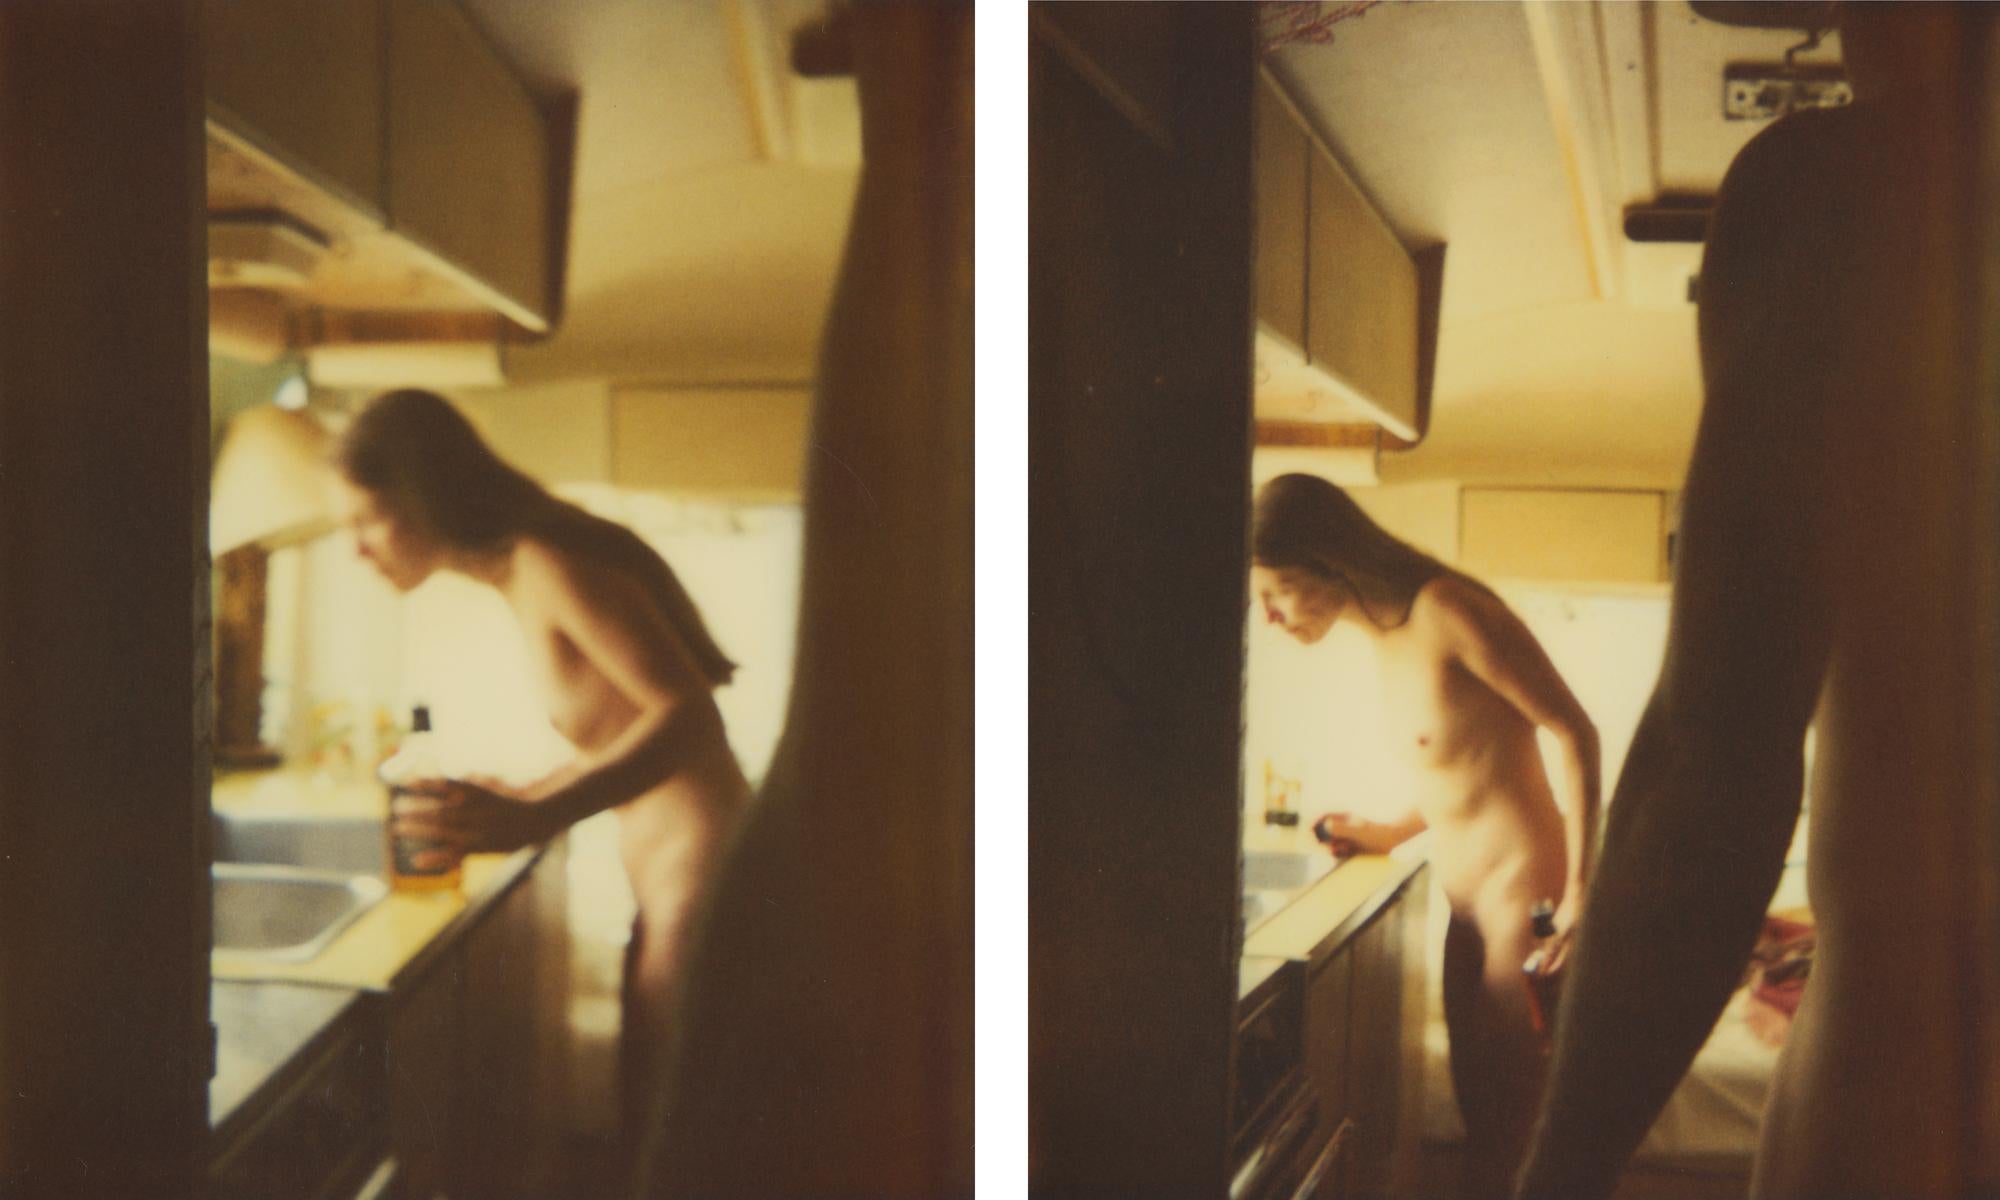 Stefanie Schneider Color Photograph - Whisky and Water VI (Sidewinder) - Diptych, Polaroid, Nude, 21st Century, Color